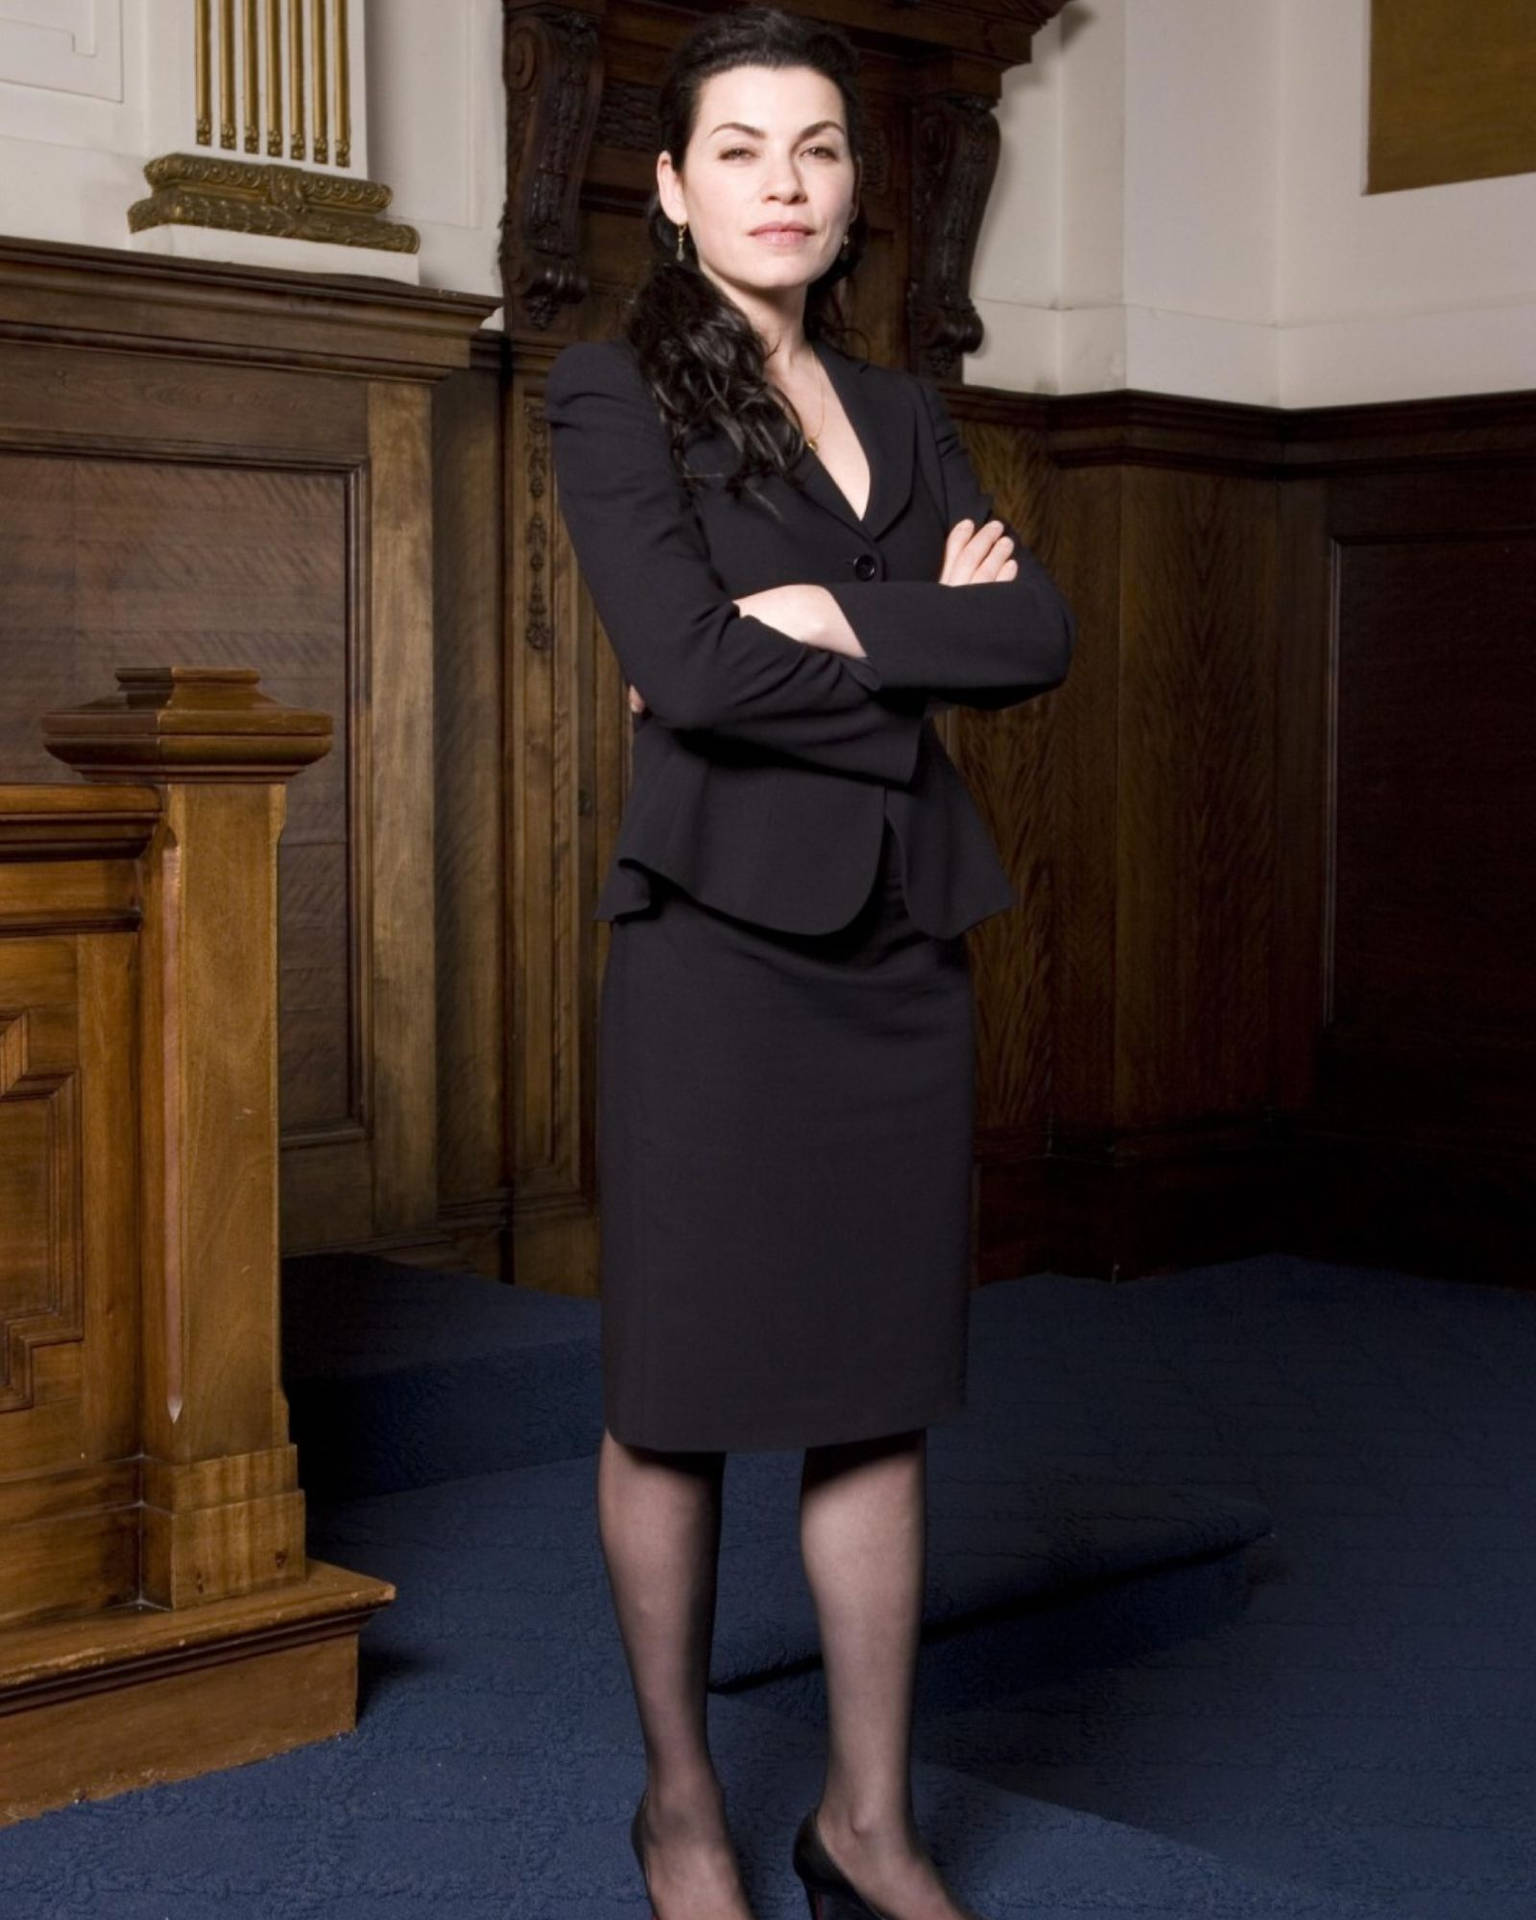 Julianna Margulies In Canterbury's Law 2008 Wallpaper